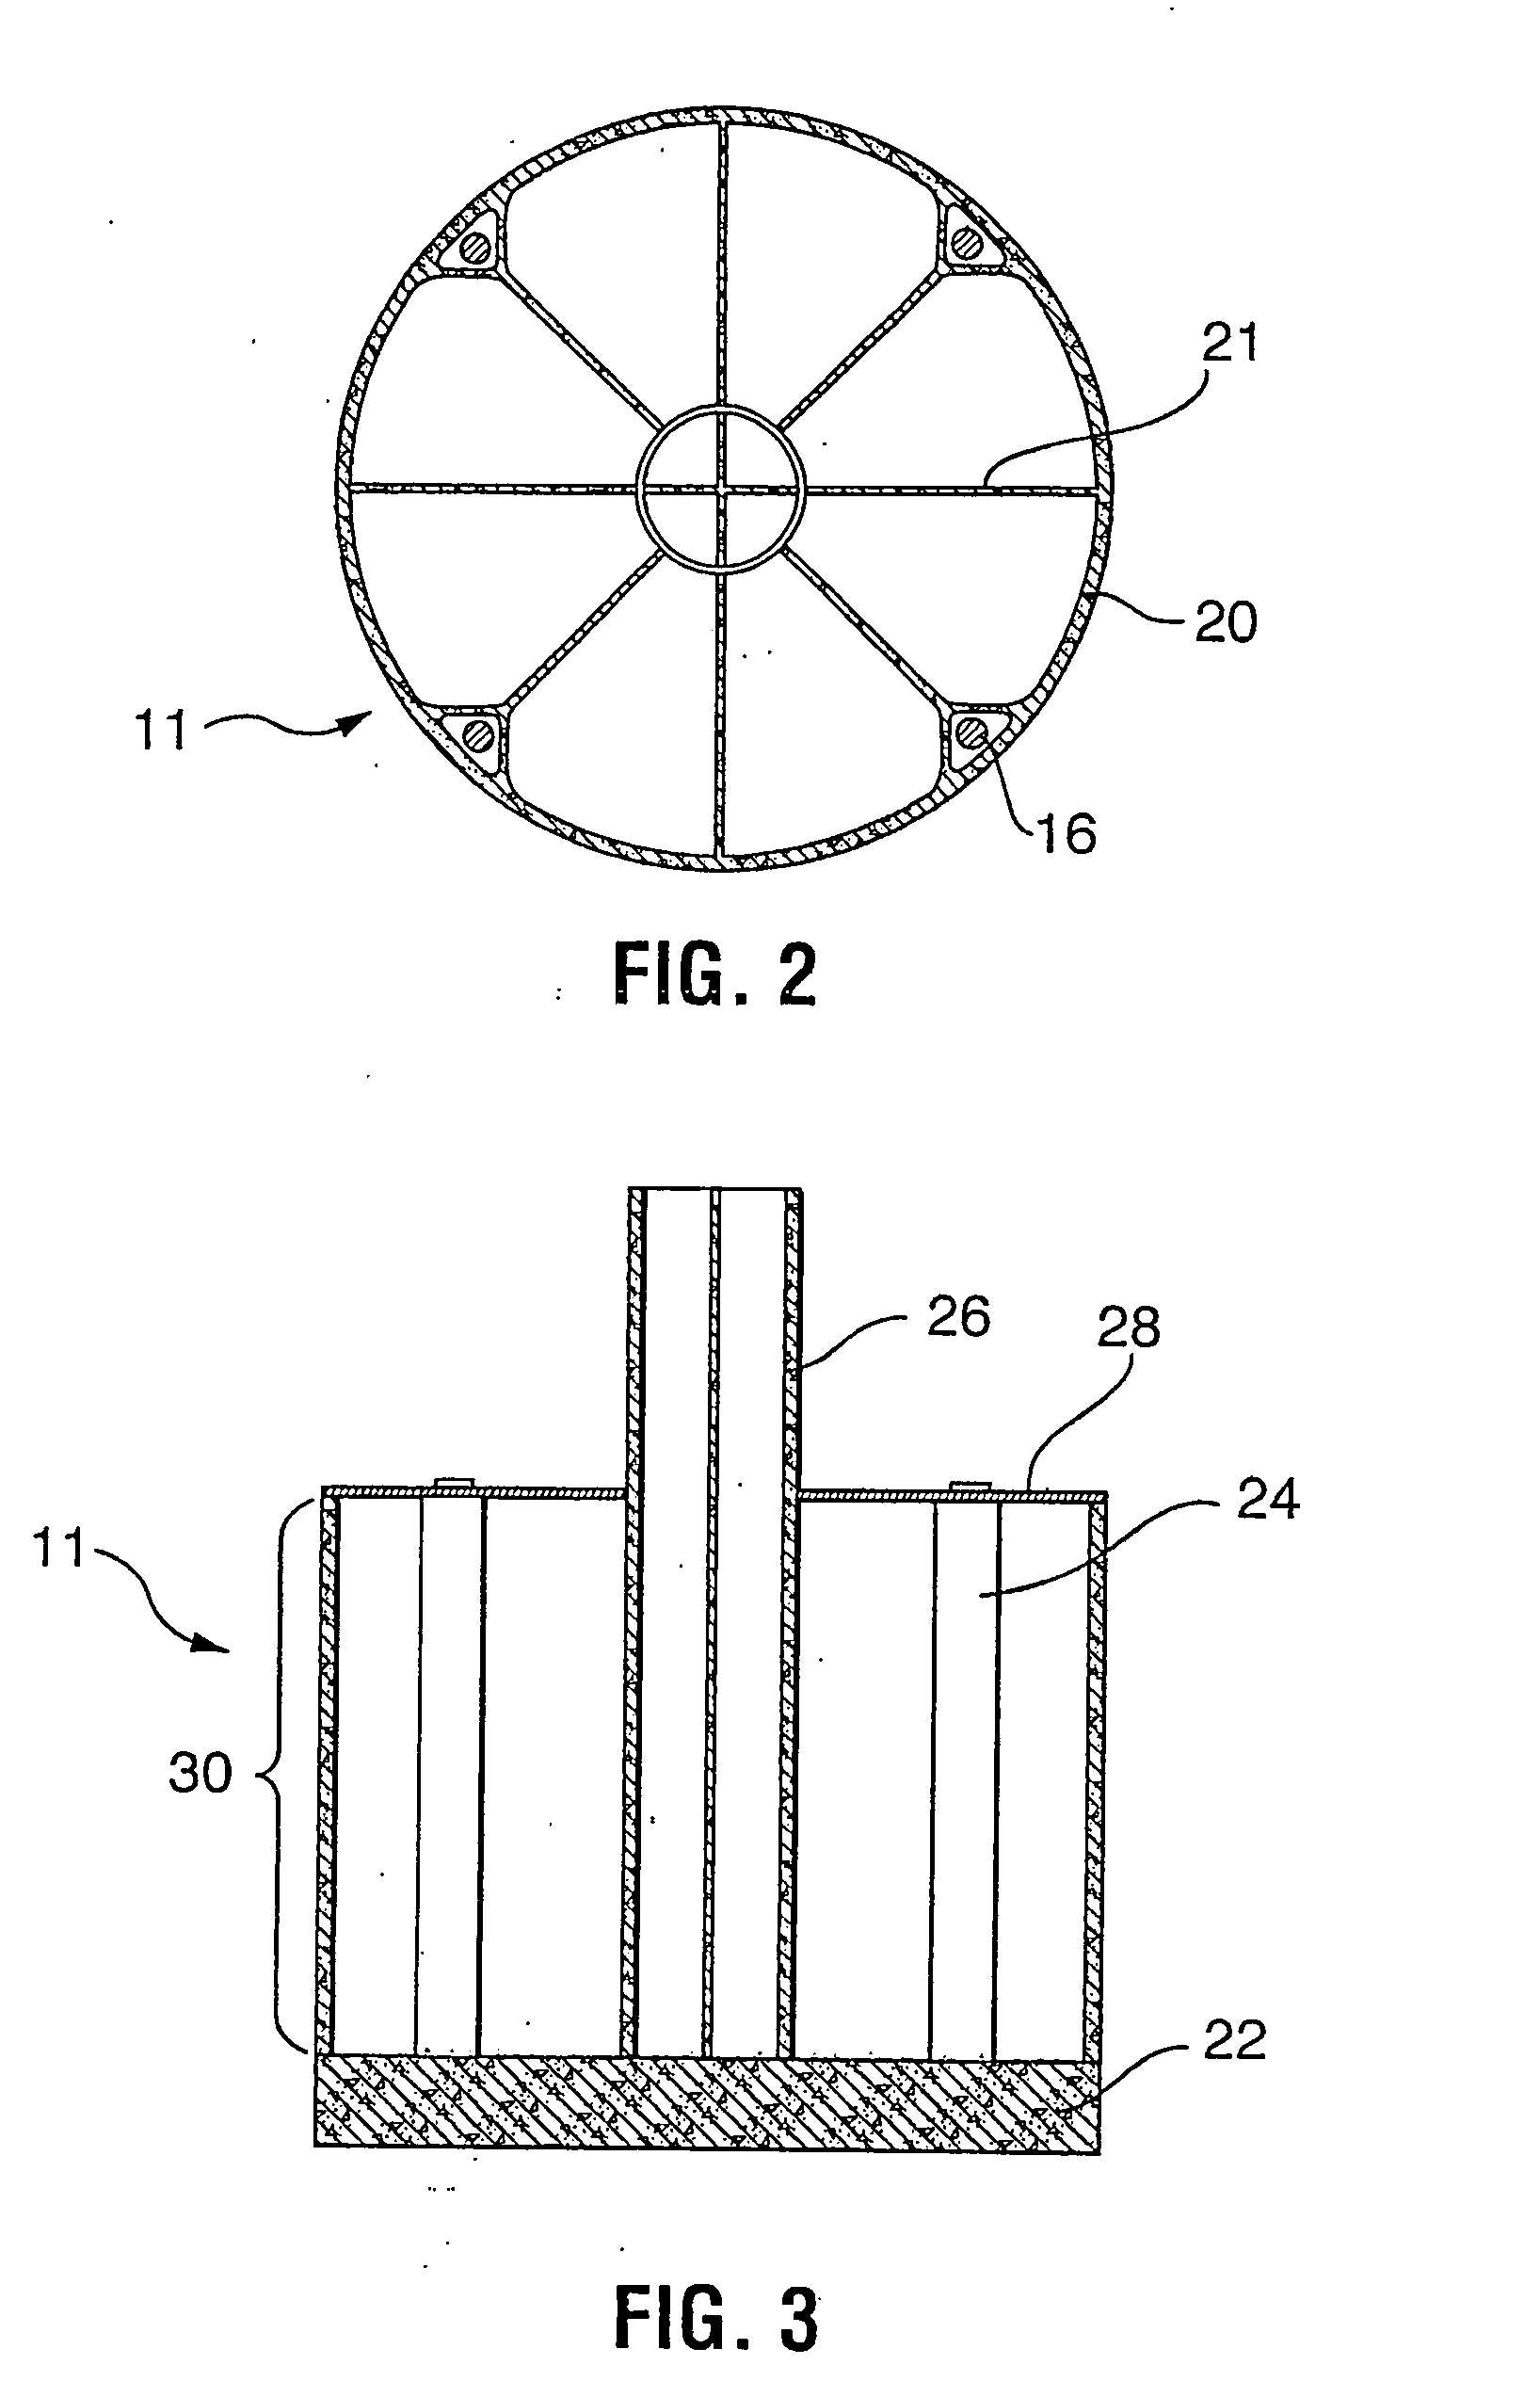 Method of construction, installation, and deployment of an offshore wind turbine on a concrete tension leg platform